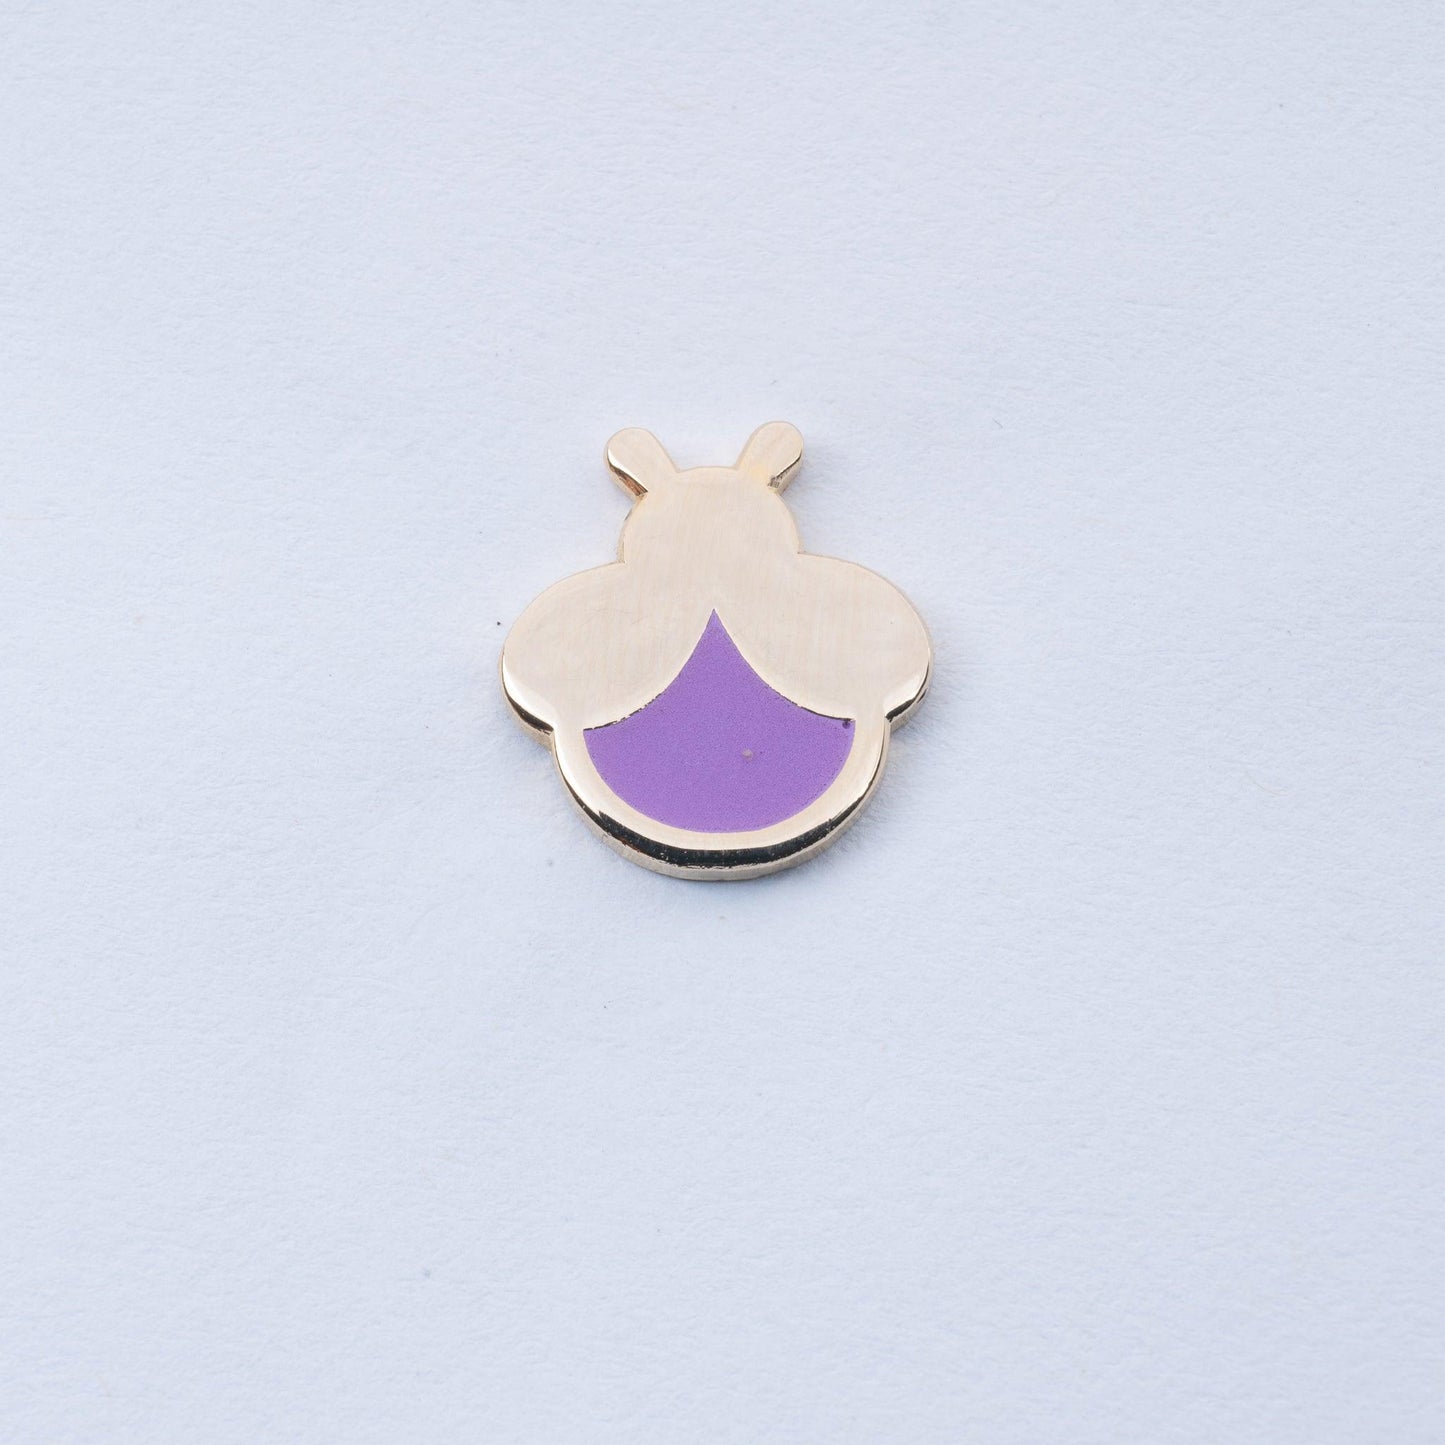 gold plated mini firefly enamel pin with lavender body that glows in the dark